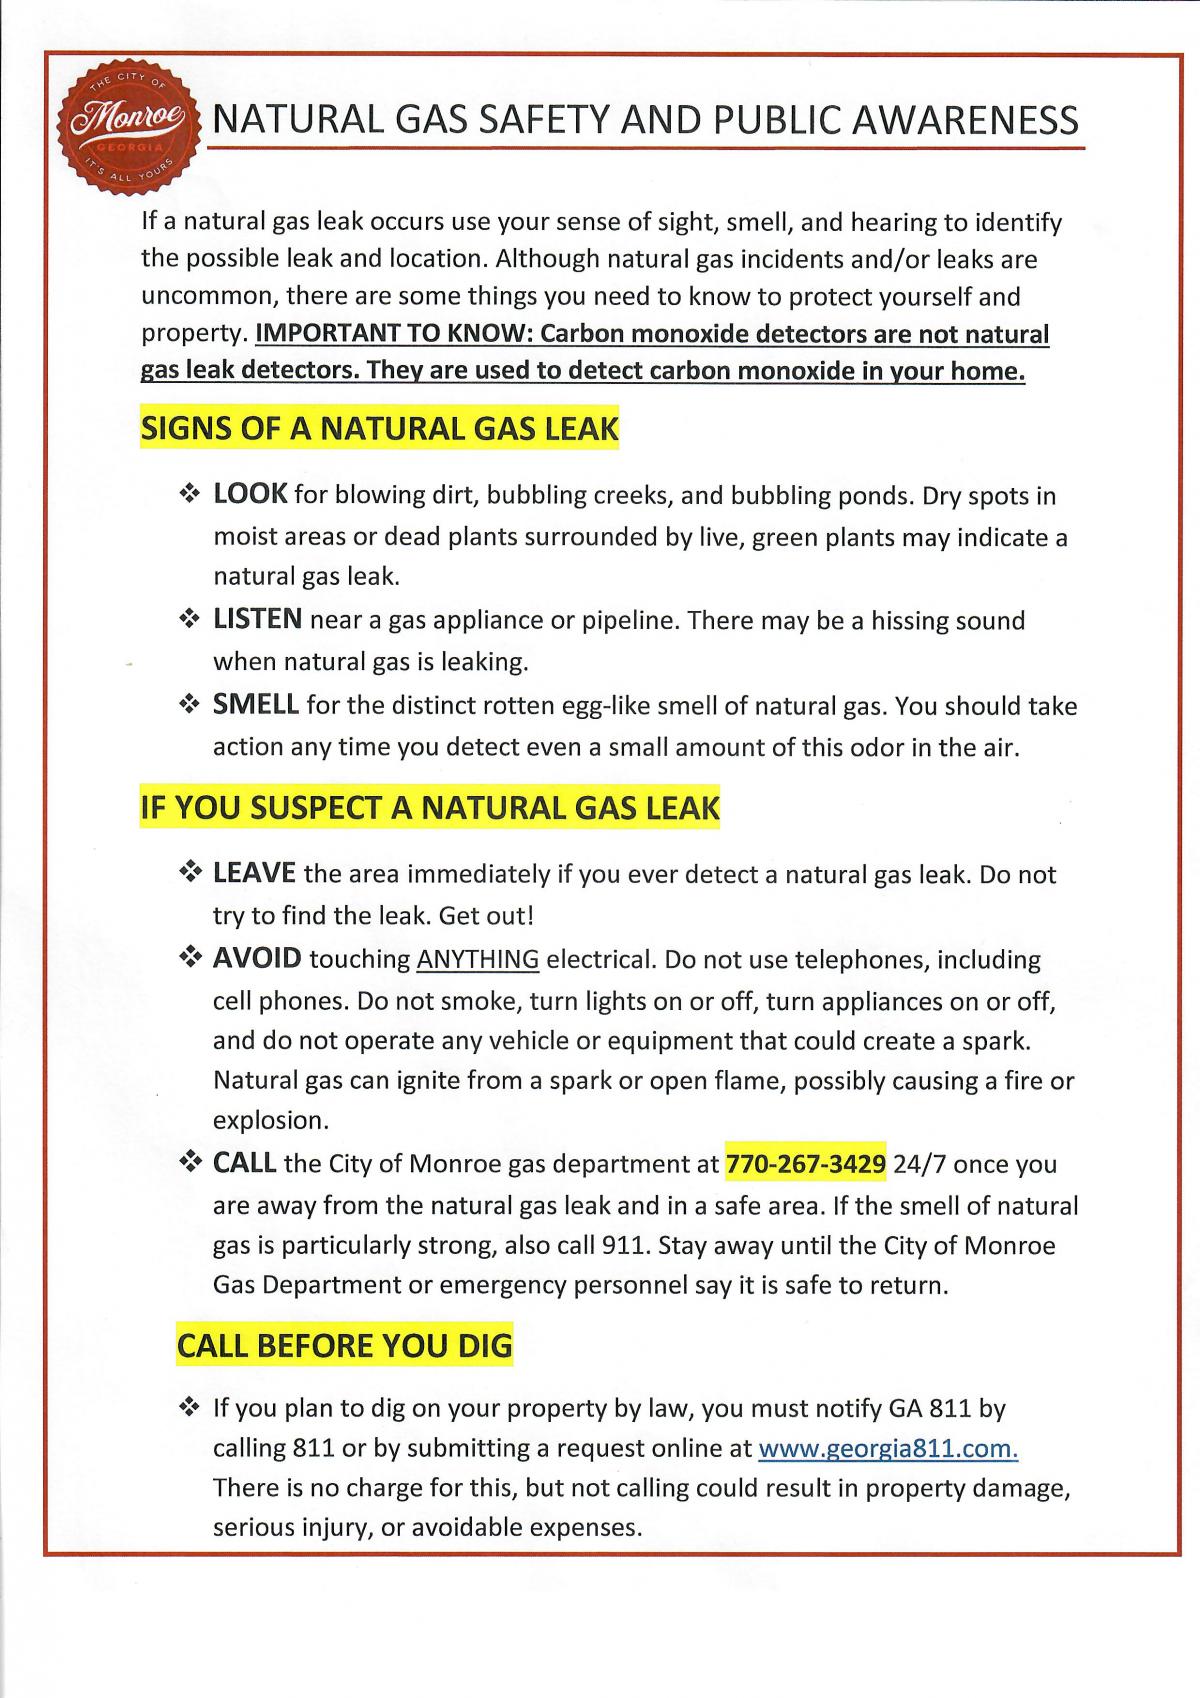 Natural Gas Safety and Public Awareness